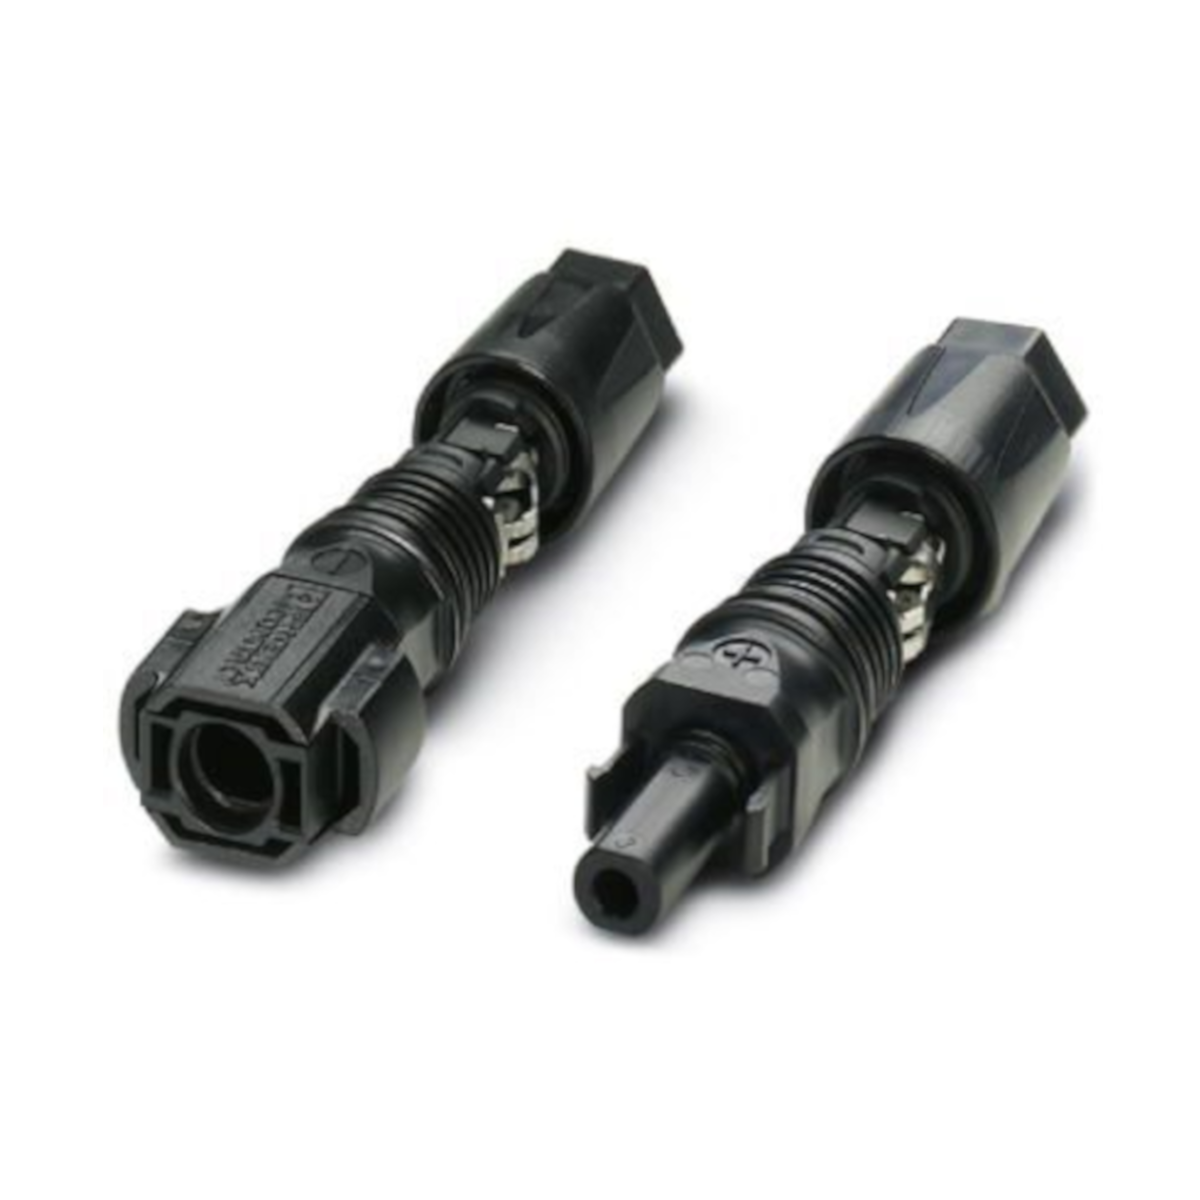 2.5 - 6 mm serial connector 2 sets SUNCLIX